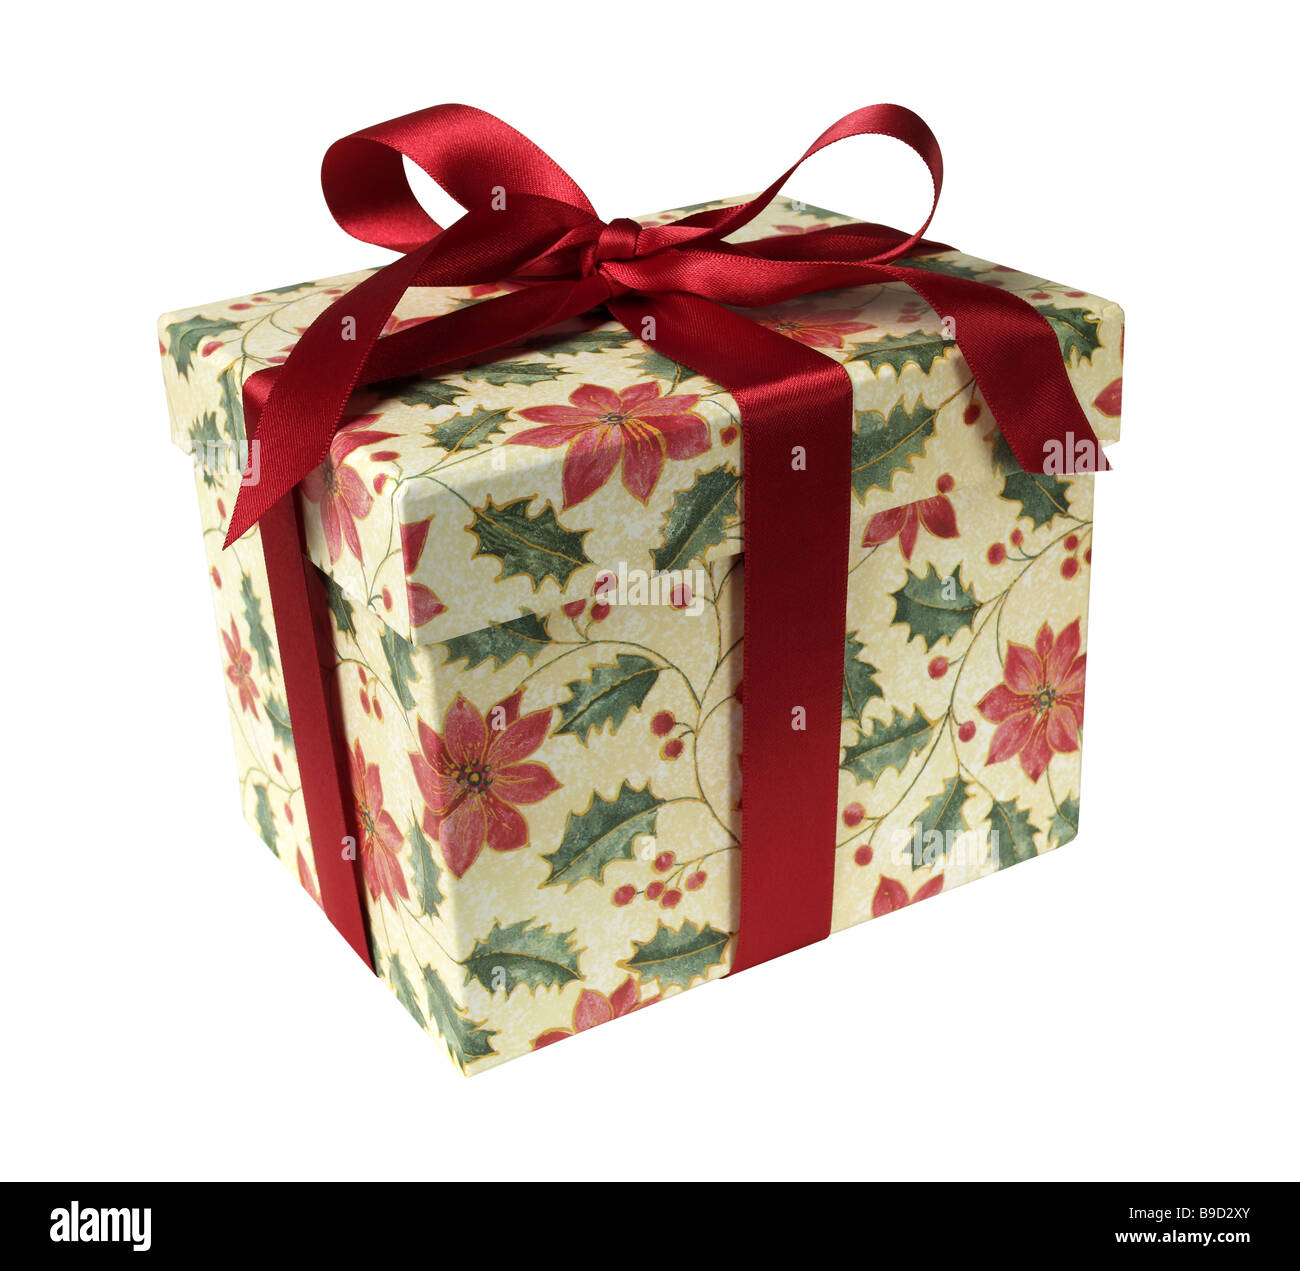 Christmas gift box with a dark-red ribbon bow. Snowflakes around Stock  Photo by ©vitcom 4478739